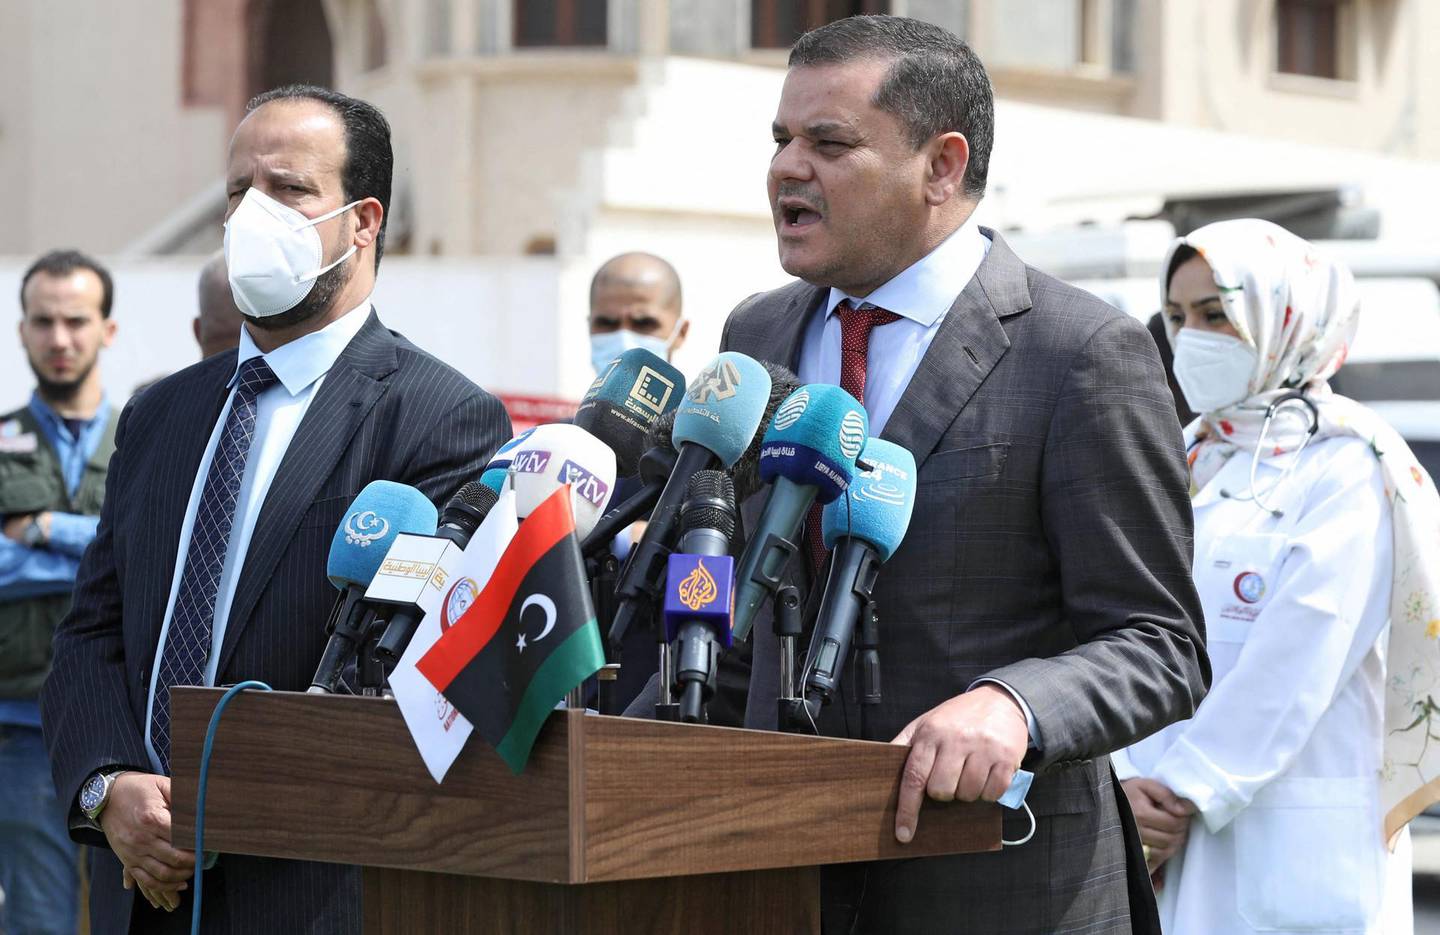 Libyan Prime Minister Abdelhamid Dbeibah, is joined by Health Minister Ali al-Zenati (L), as he delivers a speech outside the Centre for Disease Control in the capital Tripoli on April 10, 2021, at the launch of the national vaccination campaign. Libya officially launched its coronavirus vaccination campaign, starting with the Prime Minister, health authorities in the conflict-wracked nation said. Dbeibah urged fellow citizens to register online for their own vaccinations.
 / AFP / Mahmud TURKIA
